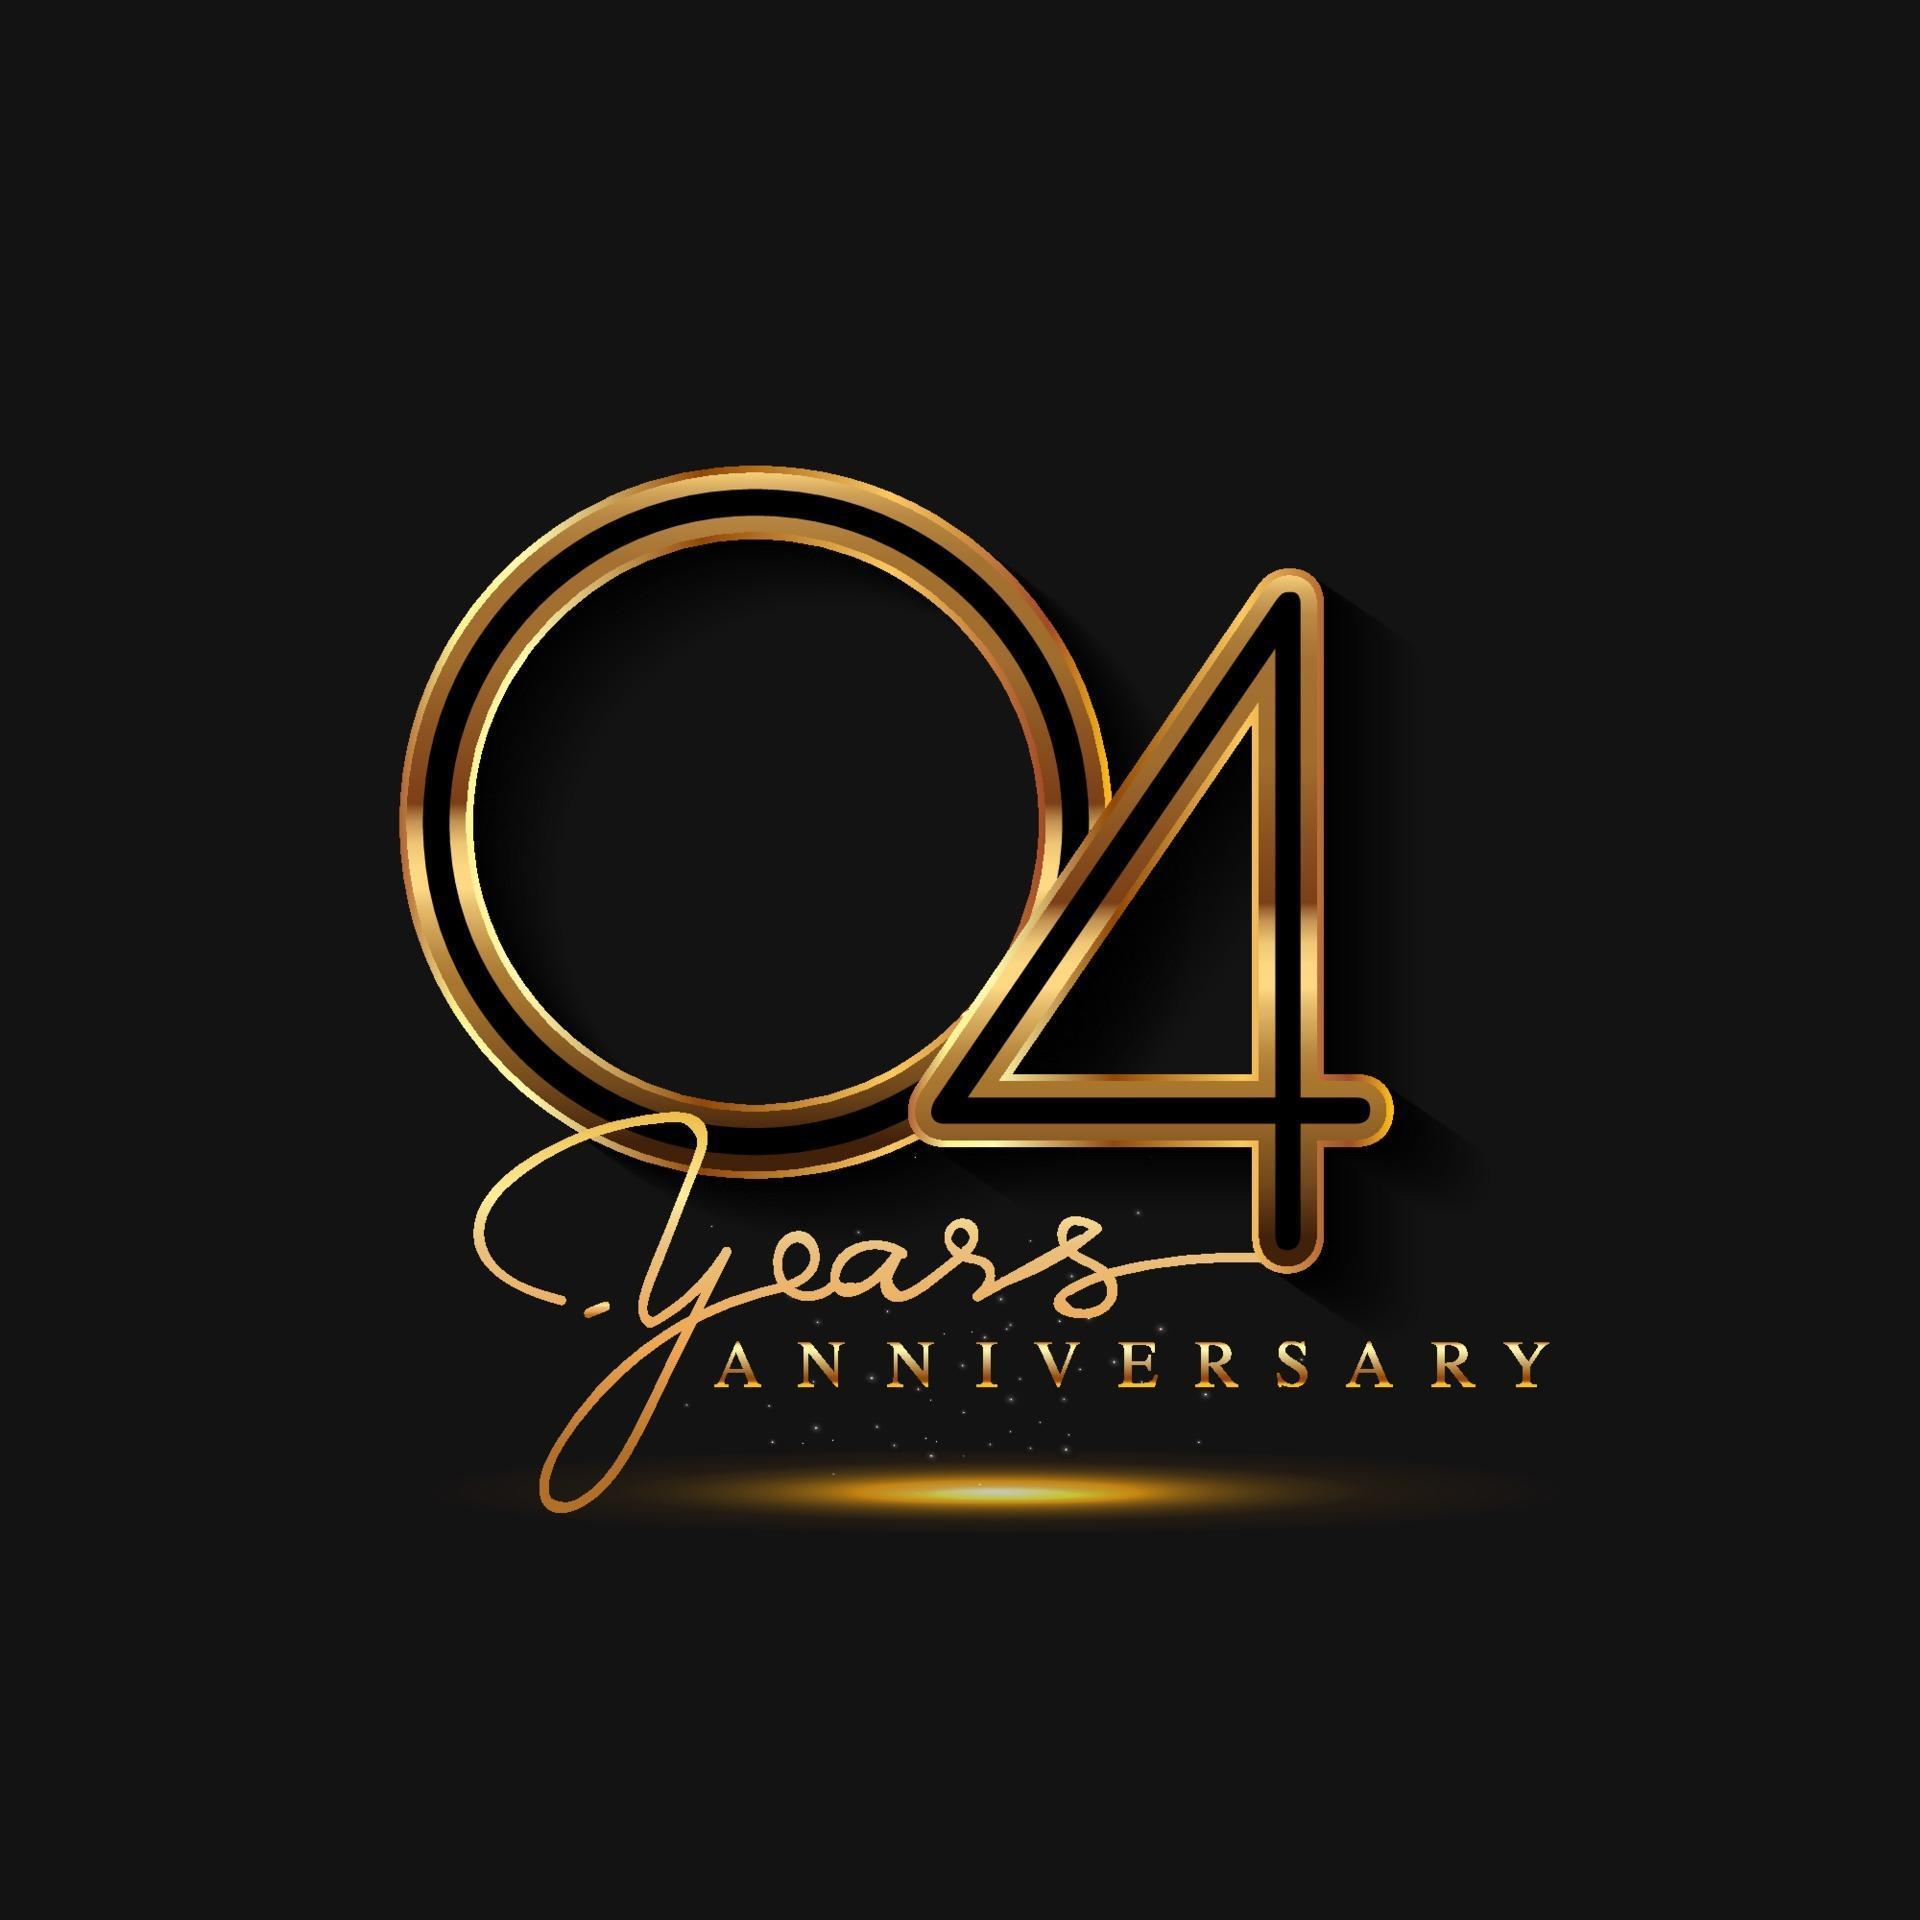 4 Years Anniversary Logo Golden Colored isolated on black background ...